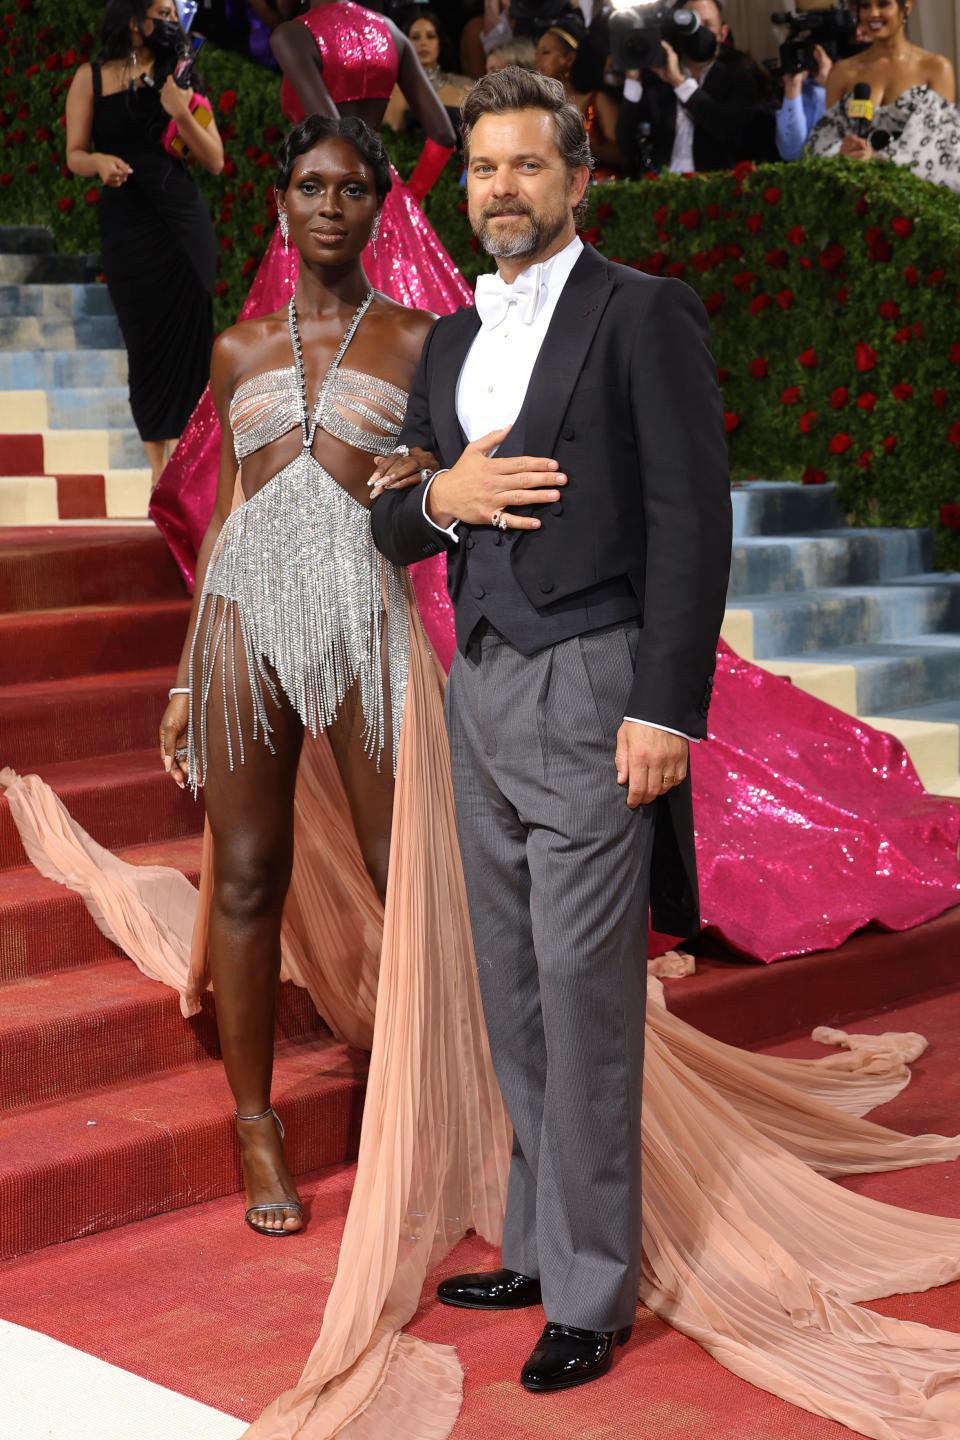 Jodie Turner-Smith and Joshua Jackson at the 2022 Met Gala. (Photo by Mike Coppola/Getty Images)